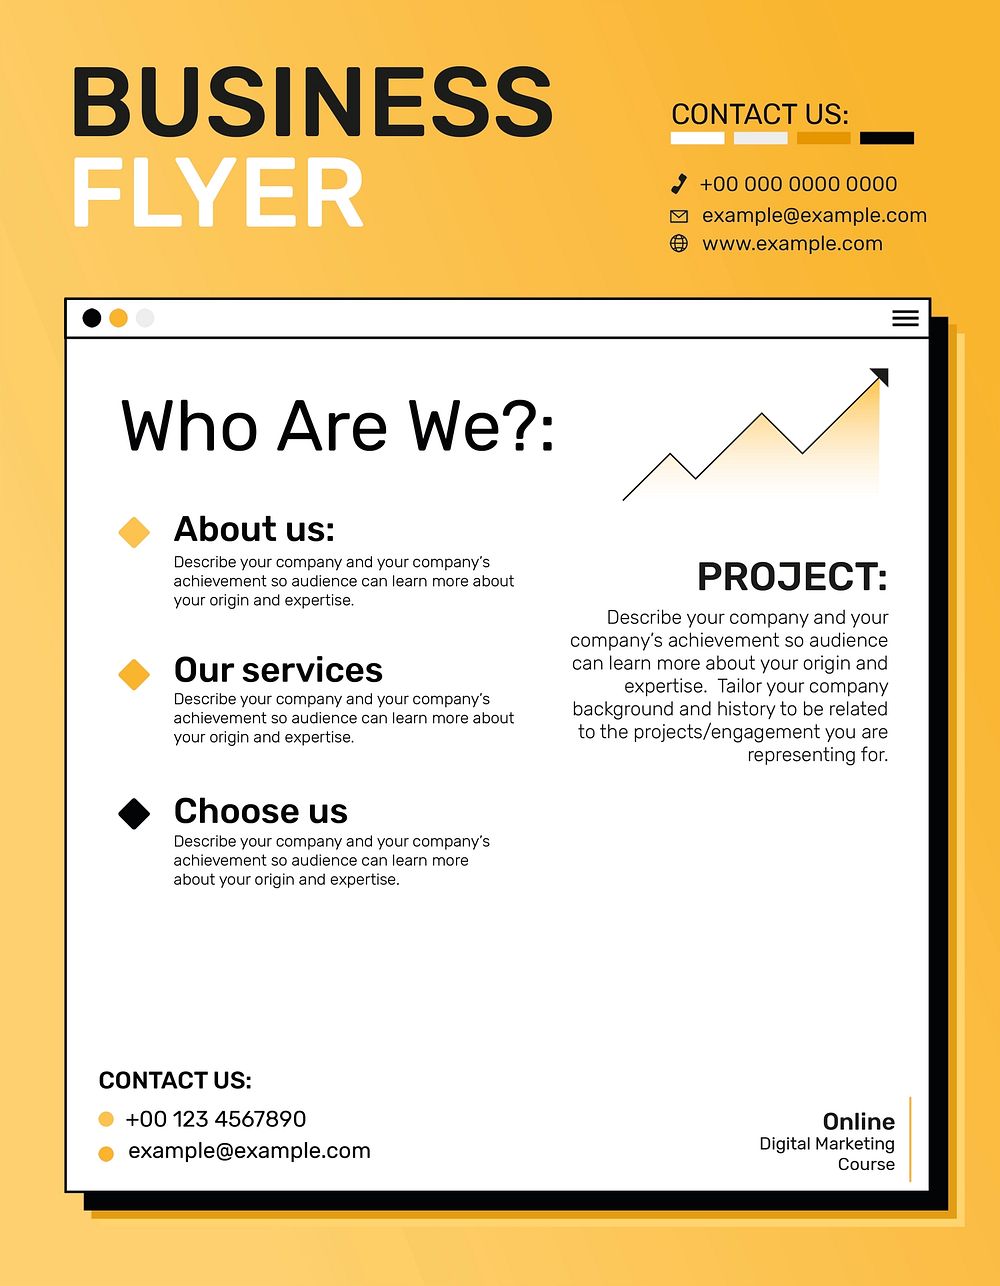 Editable business flyer template psd in yellow pixelated 8 bit design